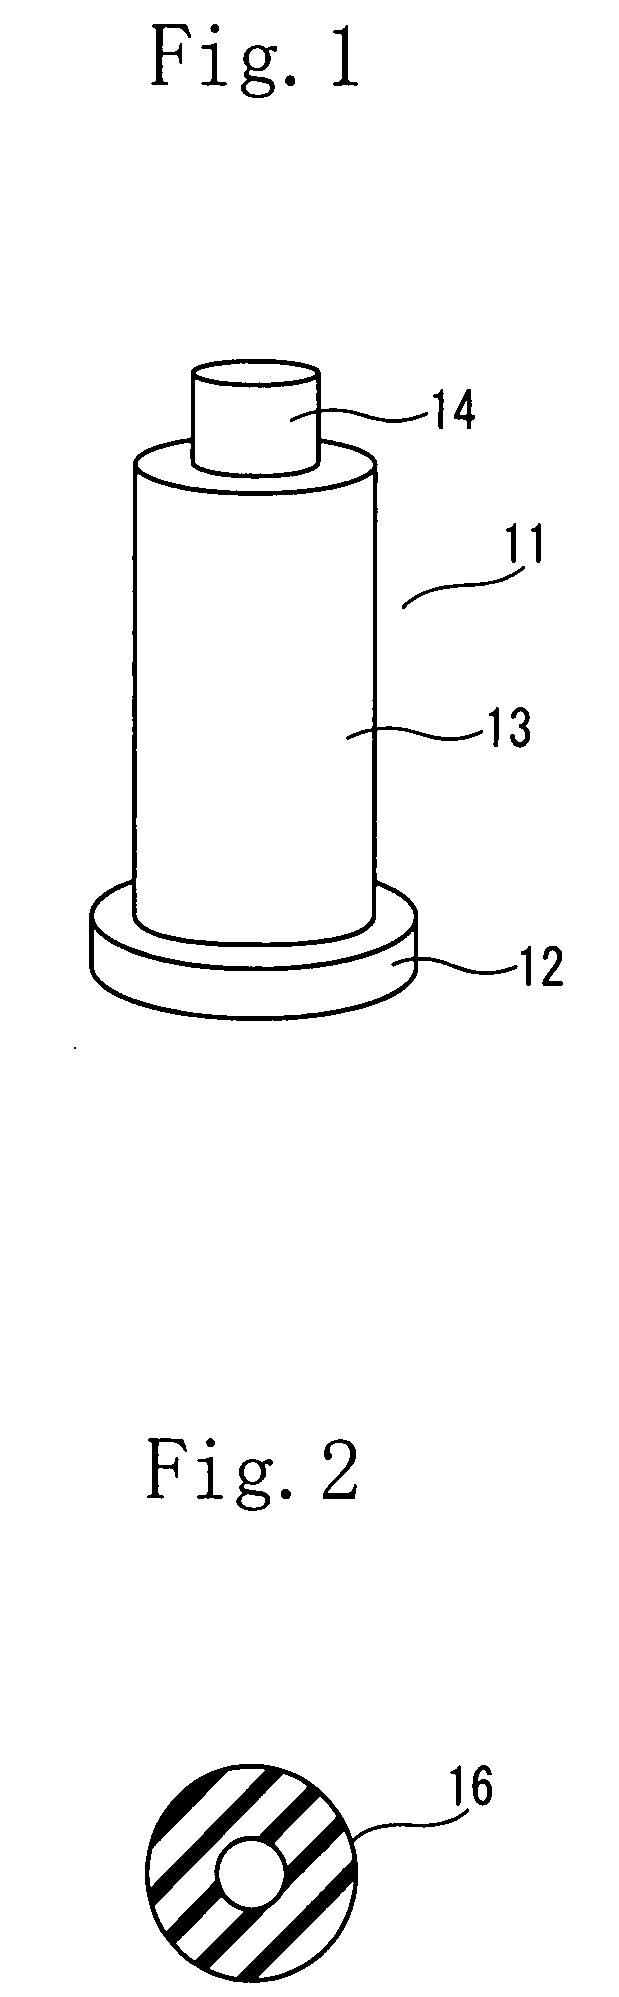 Rubber specimen-stretching jig and apparatus and method for analyzing molecular structure and molecular motion of stretched rubber specimen